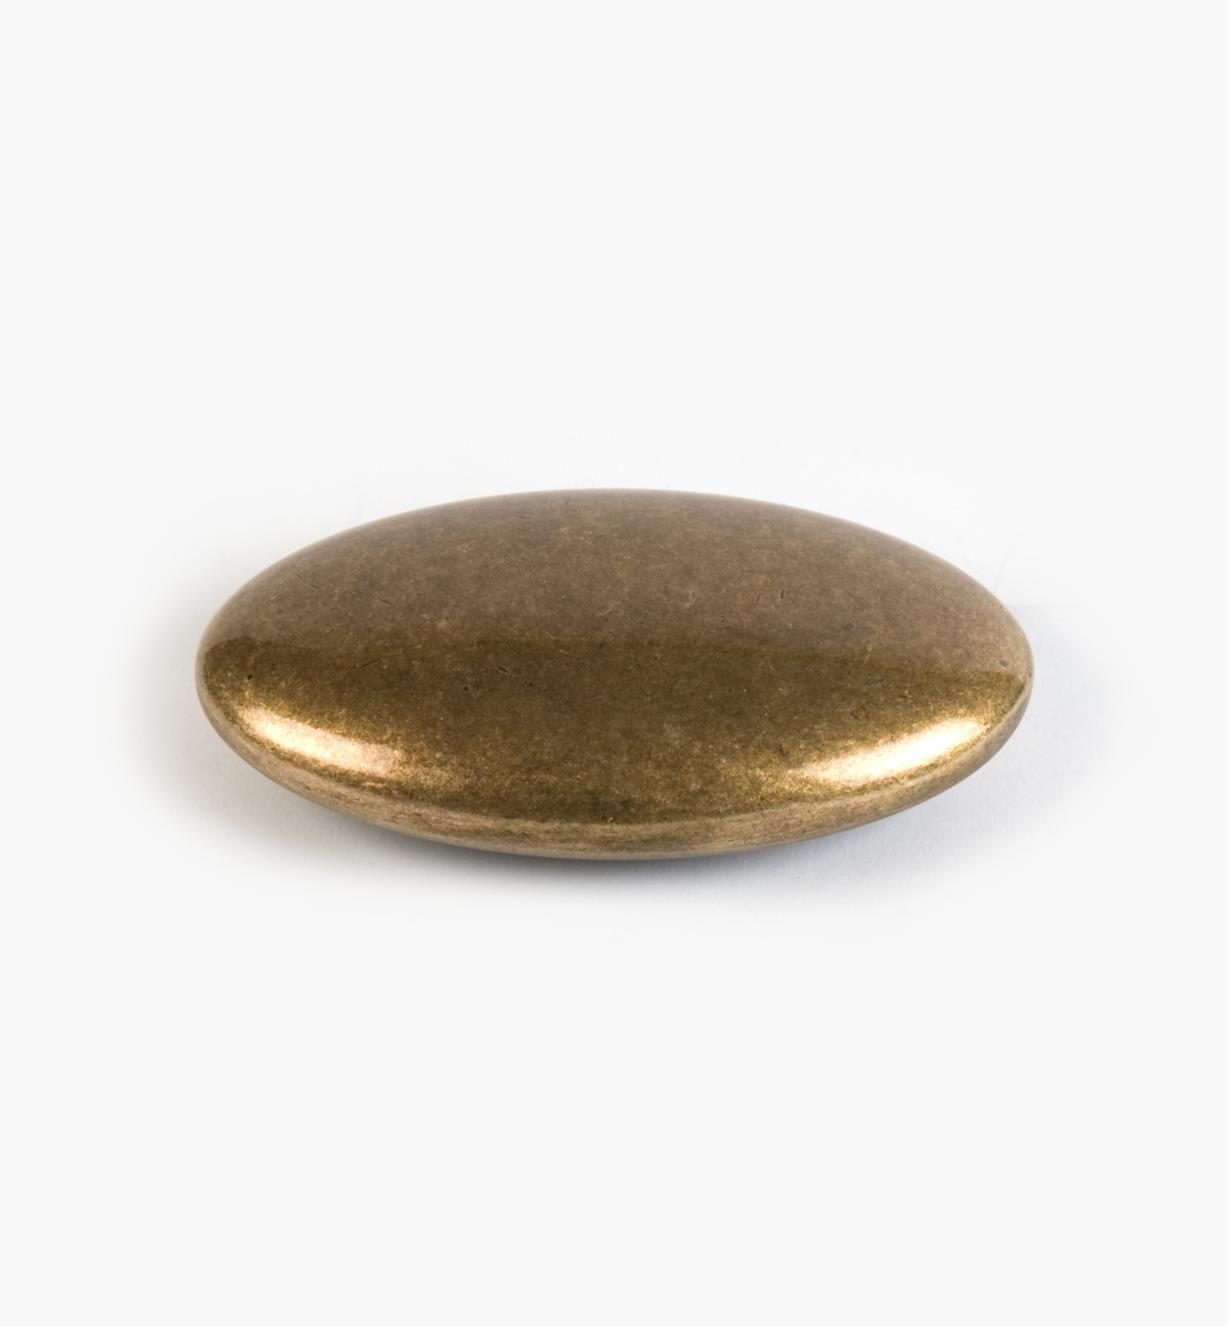 01G1614 - 64mm Oval Antique Brass Stone Pull